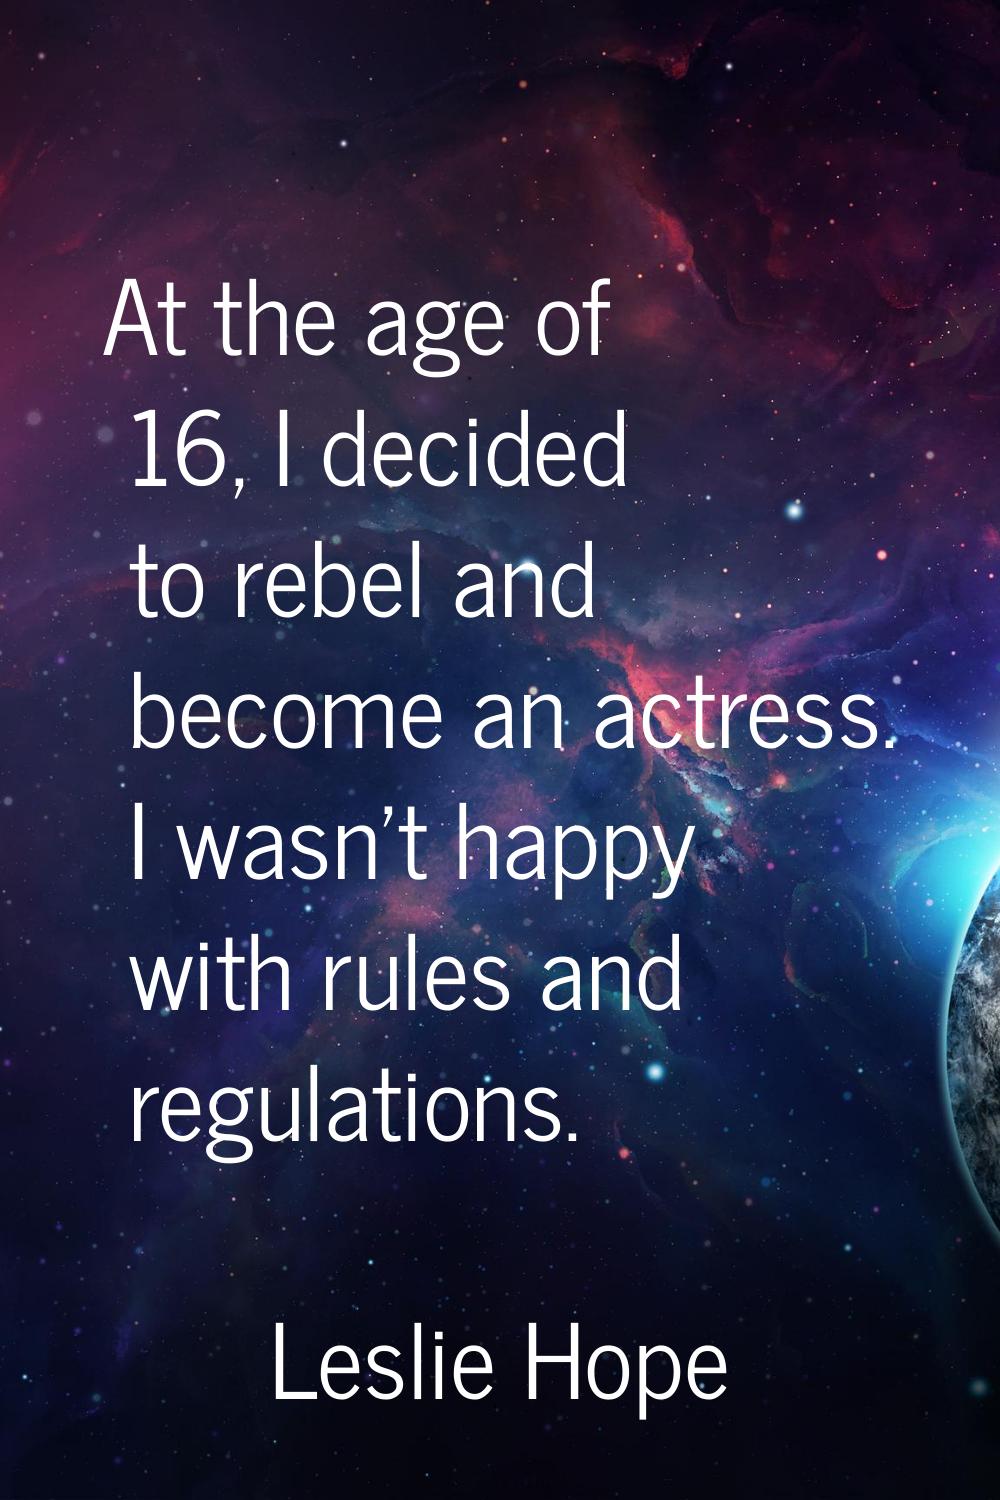 At the age of 16, I decided to rebel and become an actress. I wasn't happy with rules and regulatio